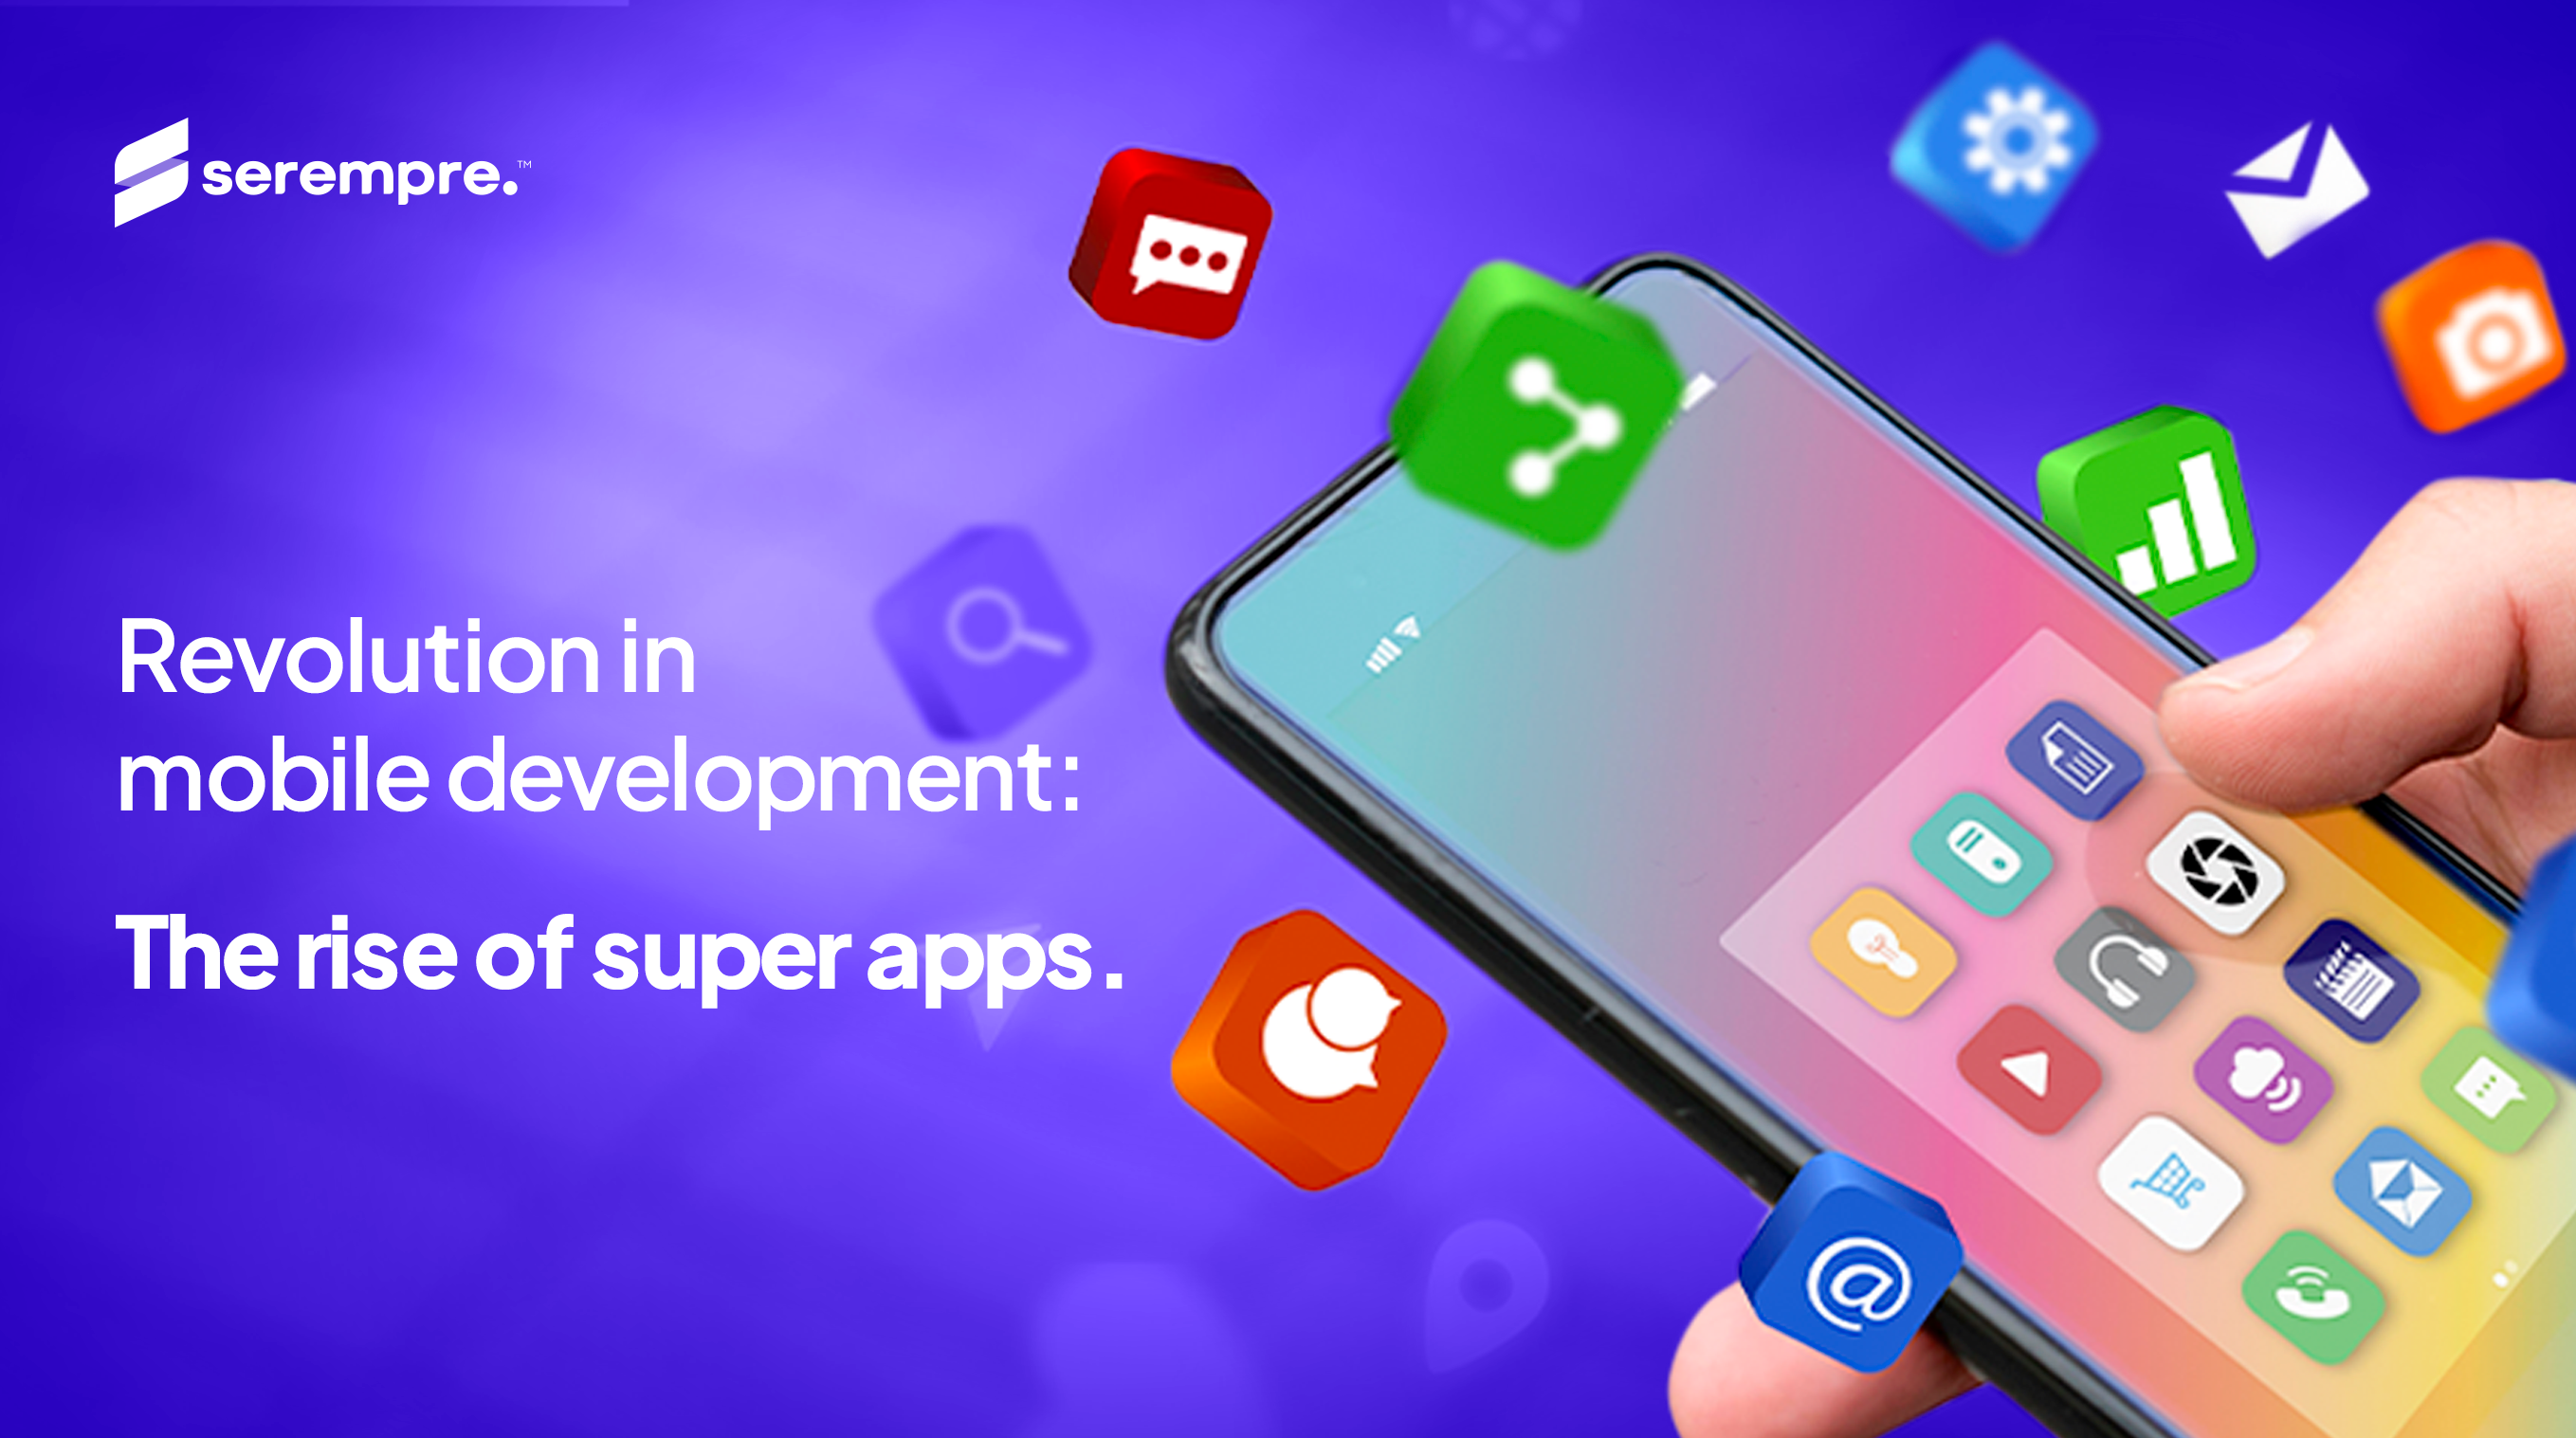 Rise of super apps